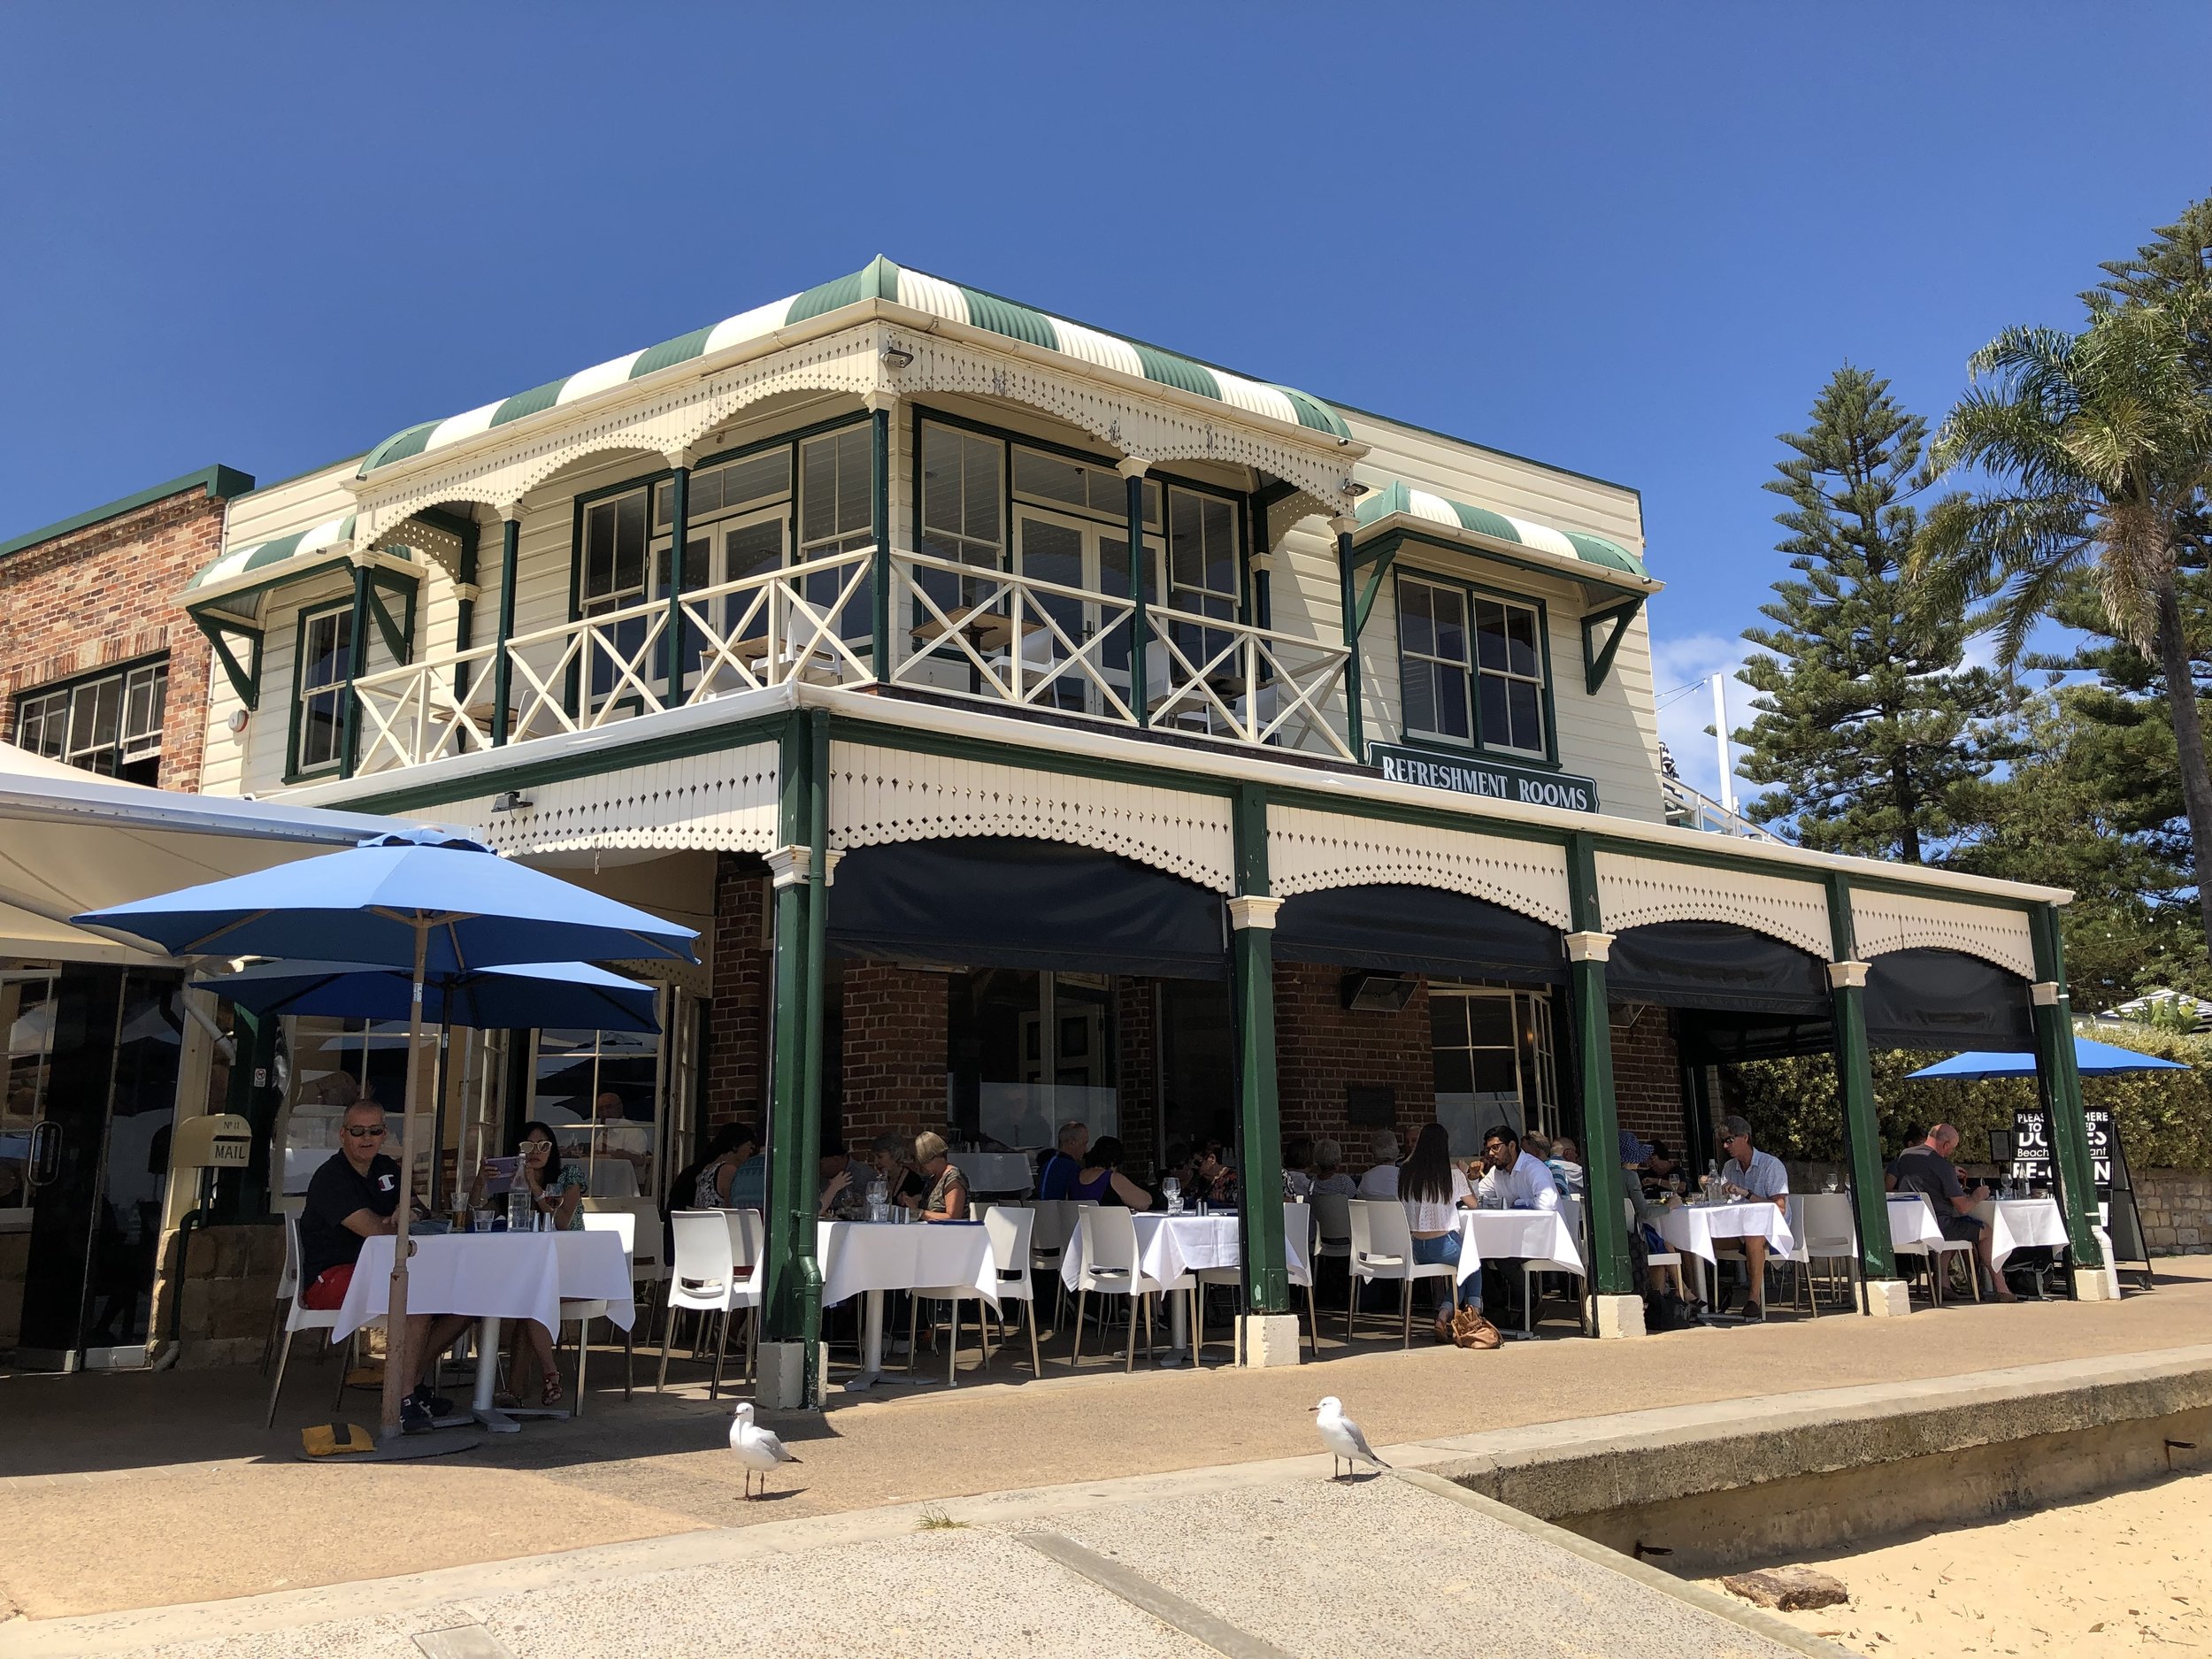 Doyles, on the beach with lovely views of the City.  You take a stunning ferry trip from Circular Quay passing the Sydney Opera House and Harbour Bridge. Just gorgeous on a hot day.